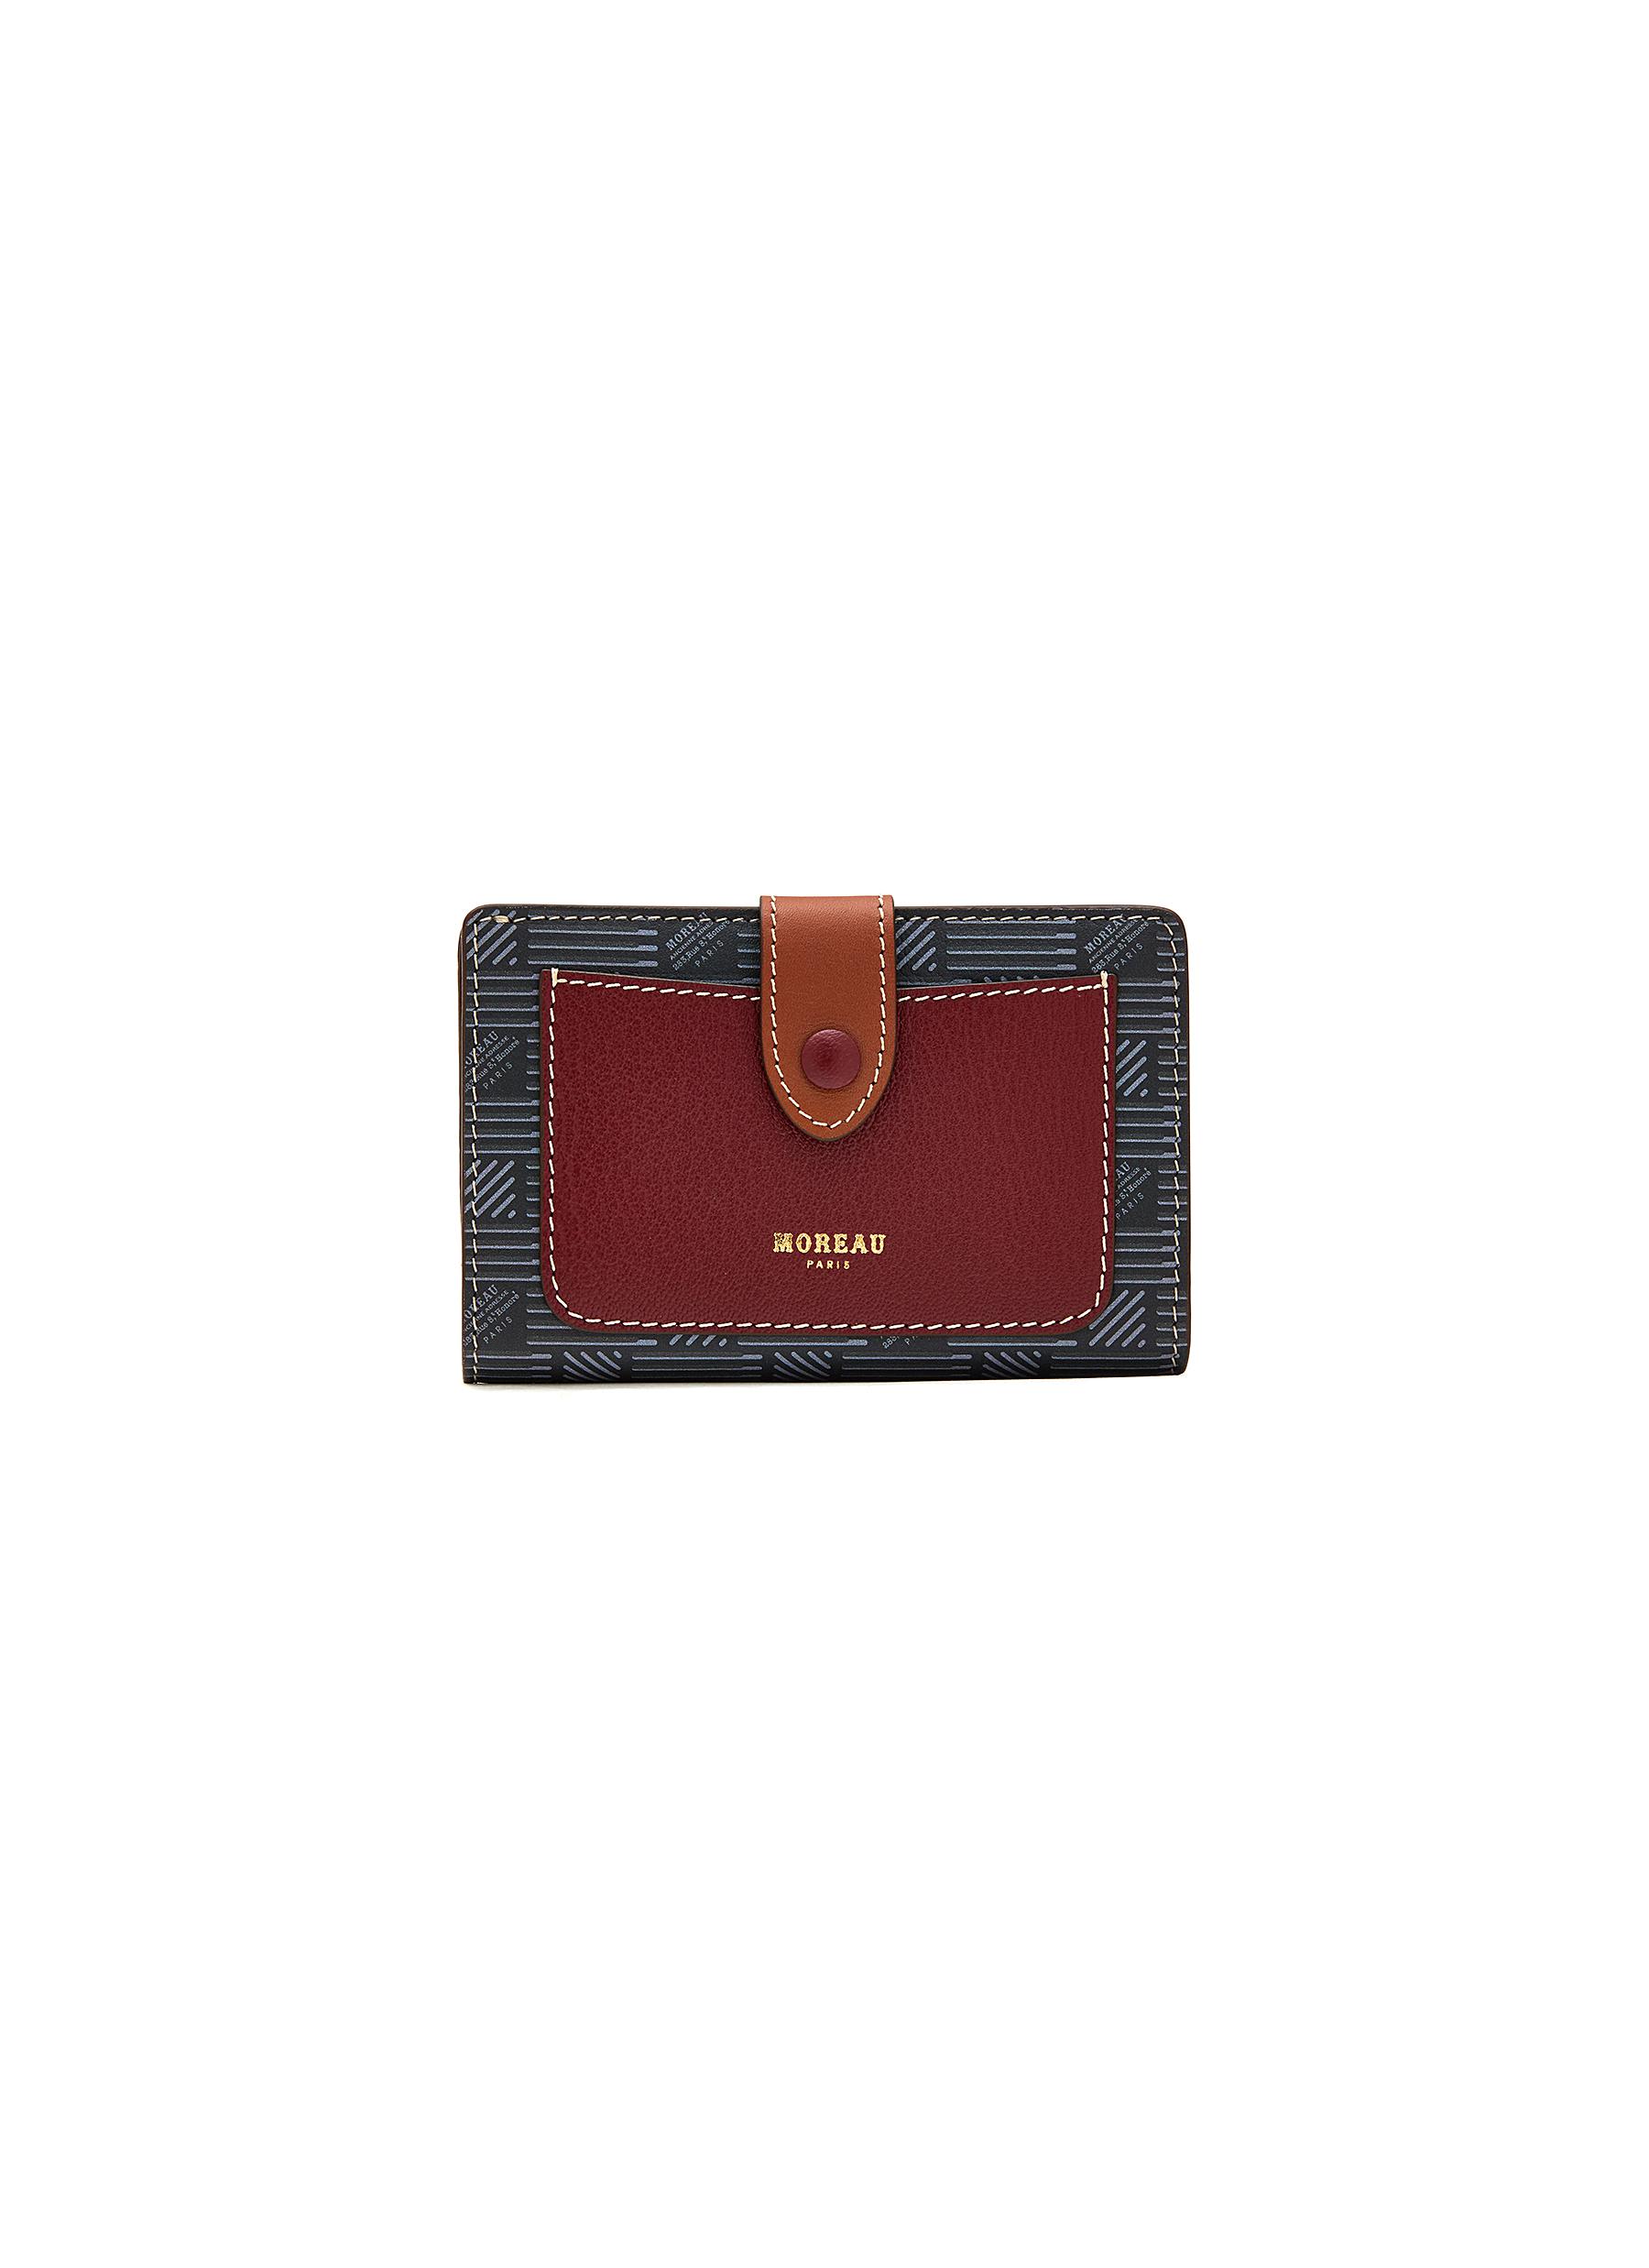 Moreau Printed Leather Bifold Wallet In Brown